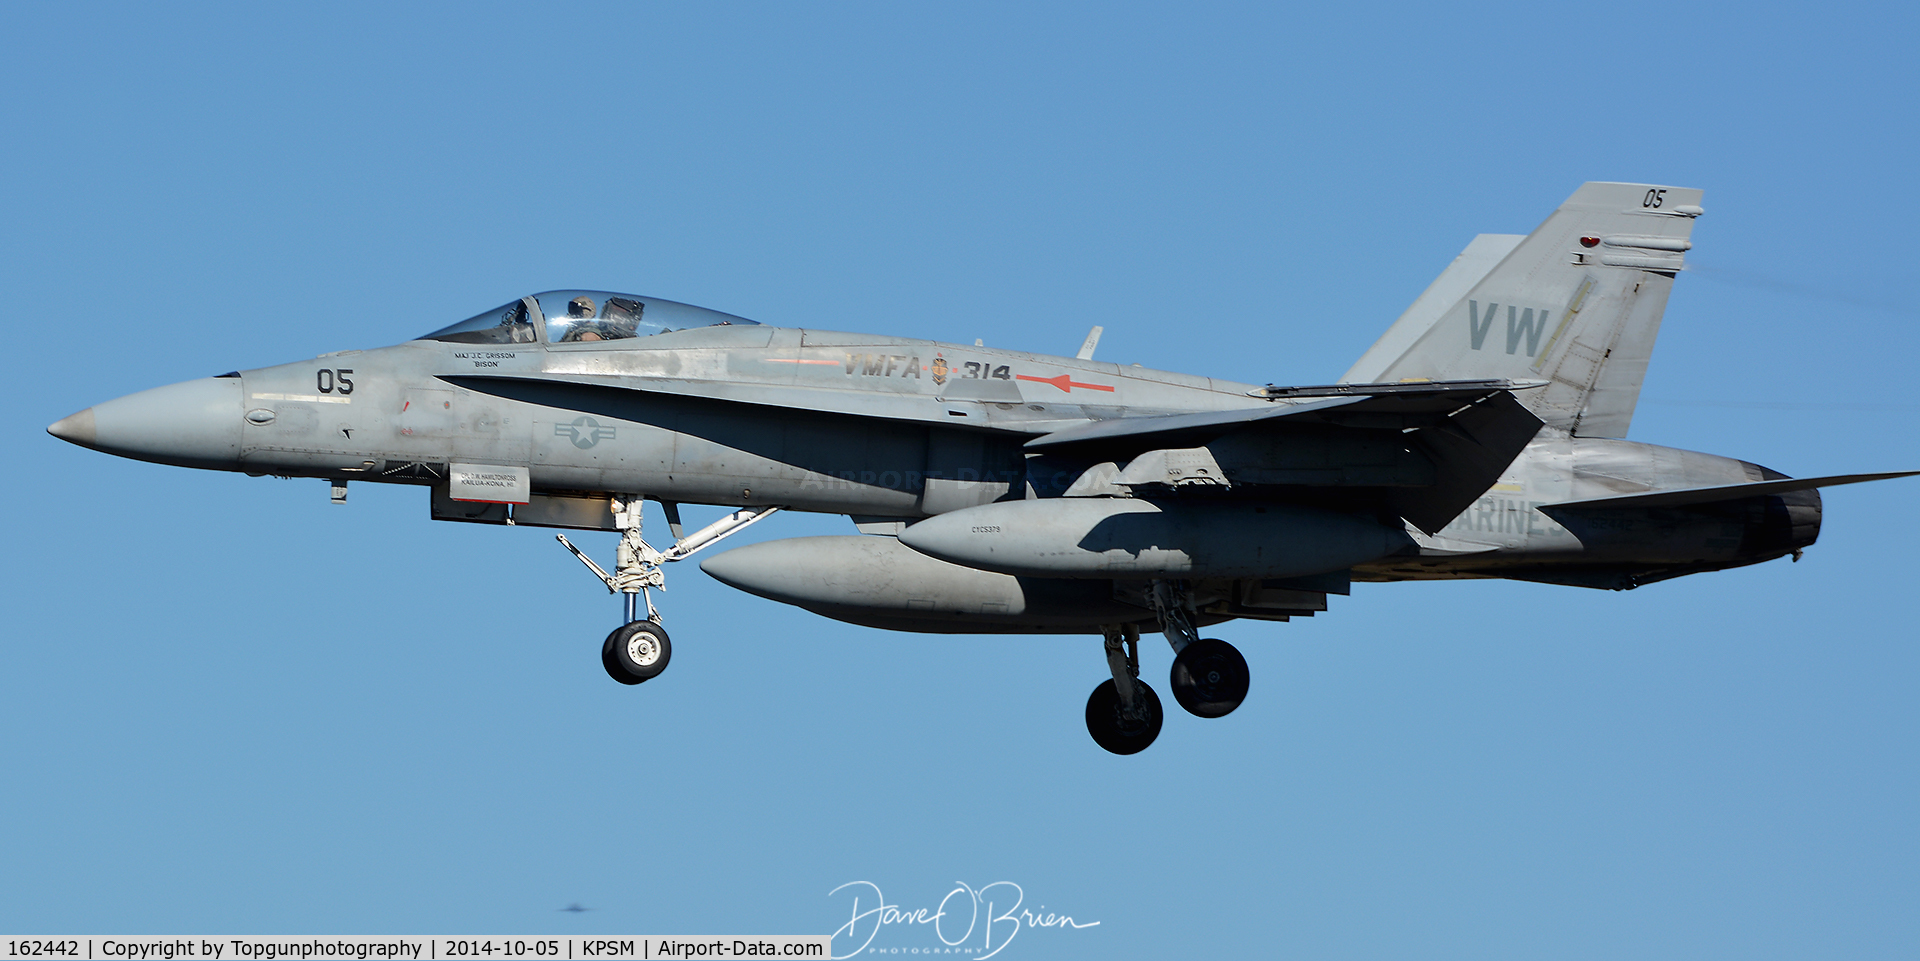 162442, McDonnell Douglas F/A-18A++ Hornet C/N 288/A233, TREND66 closes out the first group down. You can see the KC-10 just under the Hornet coming in next.